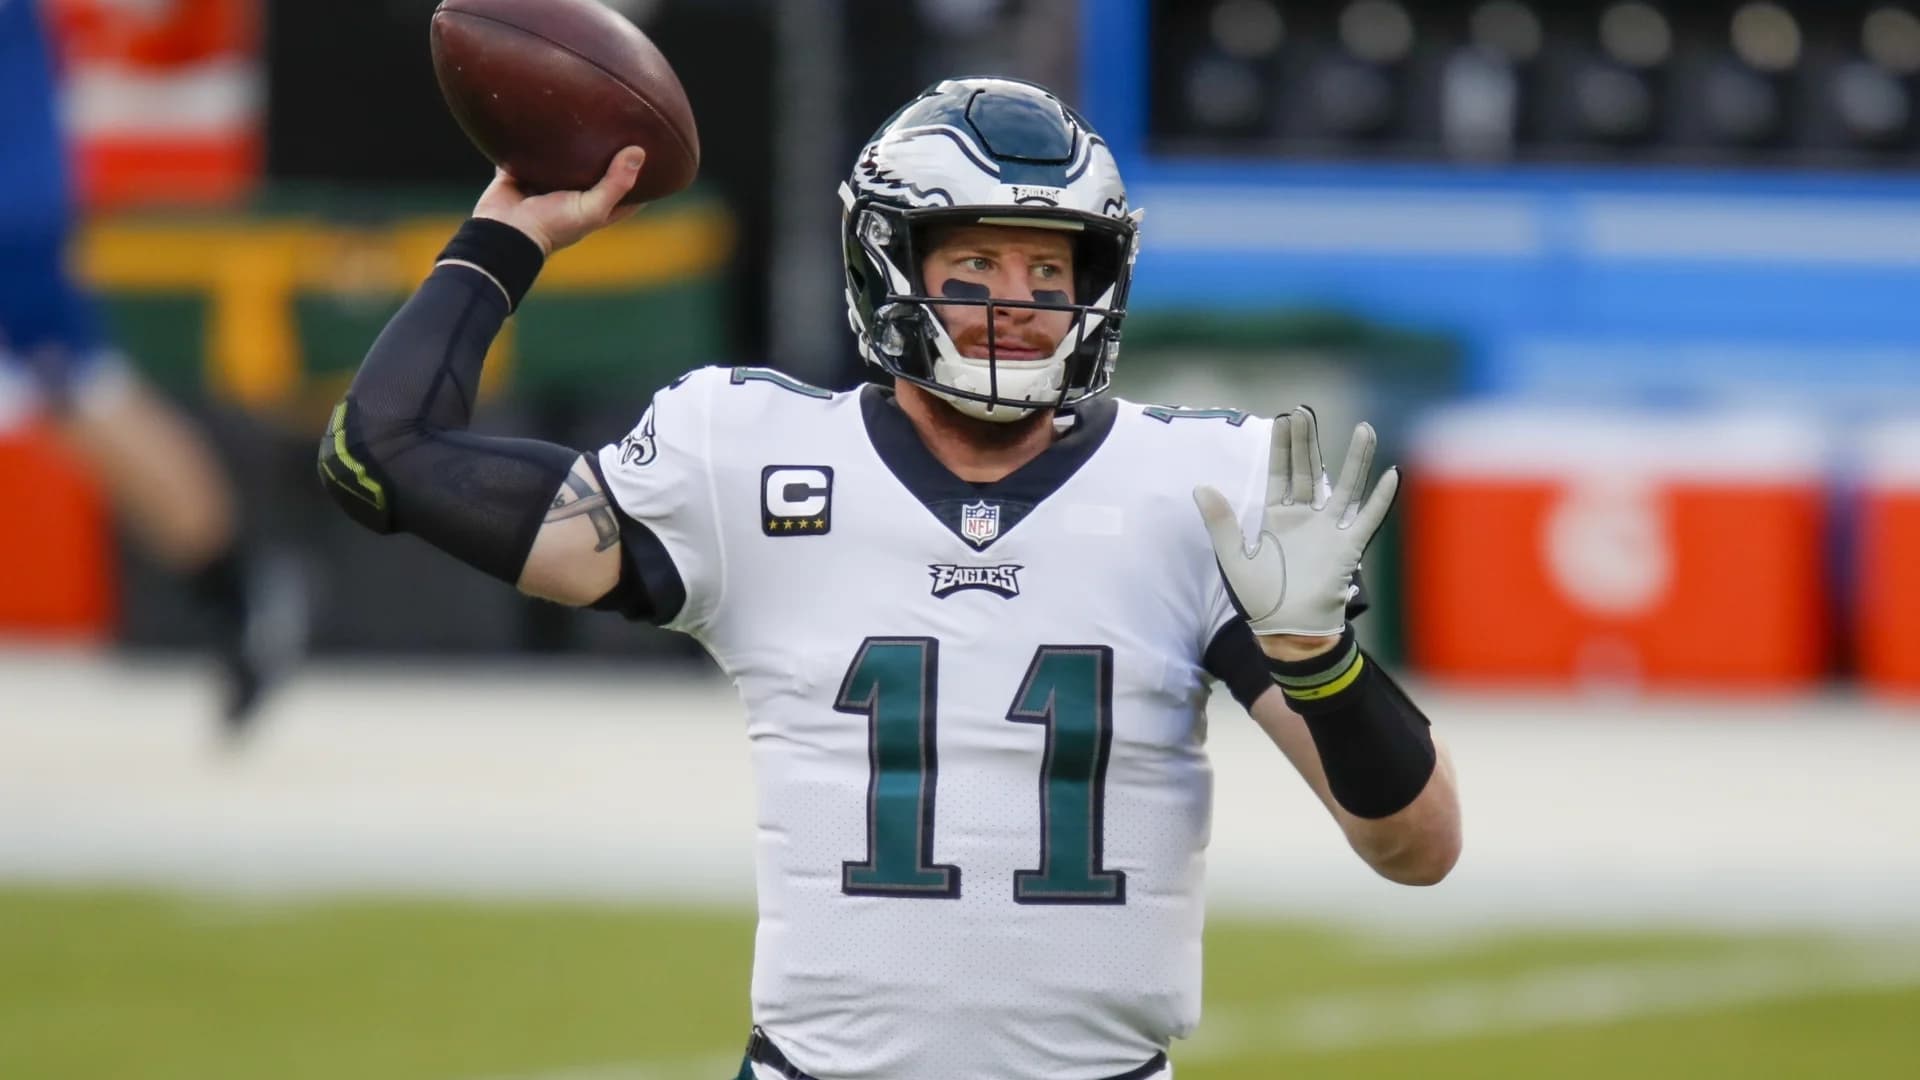 AP source: Eagles send Carson Wentz to Colts for draft picks